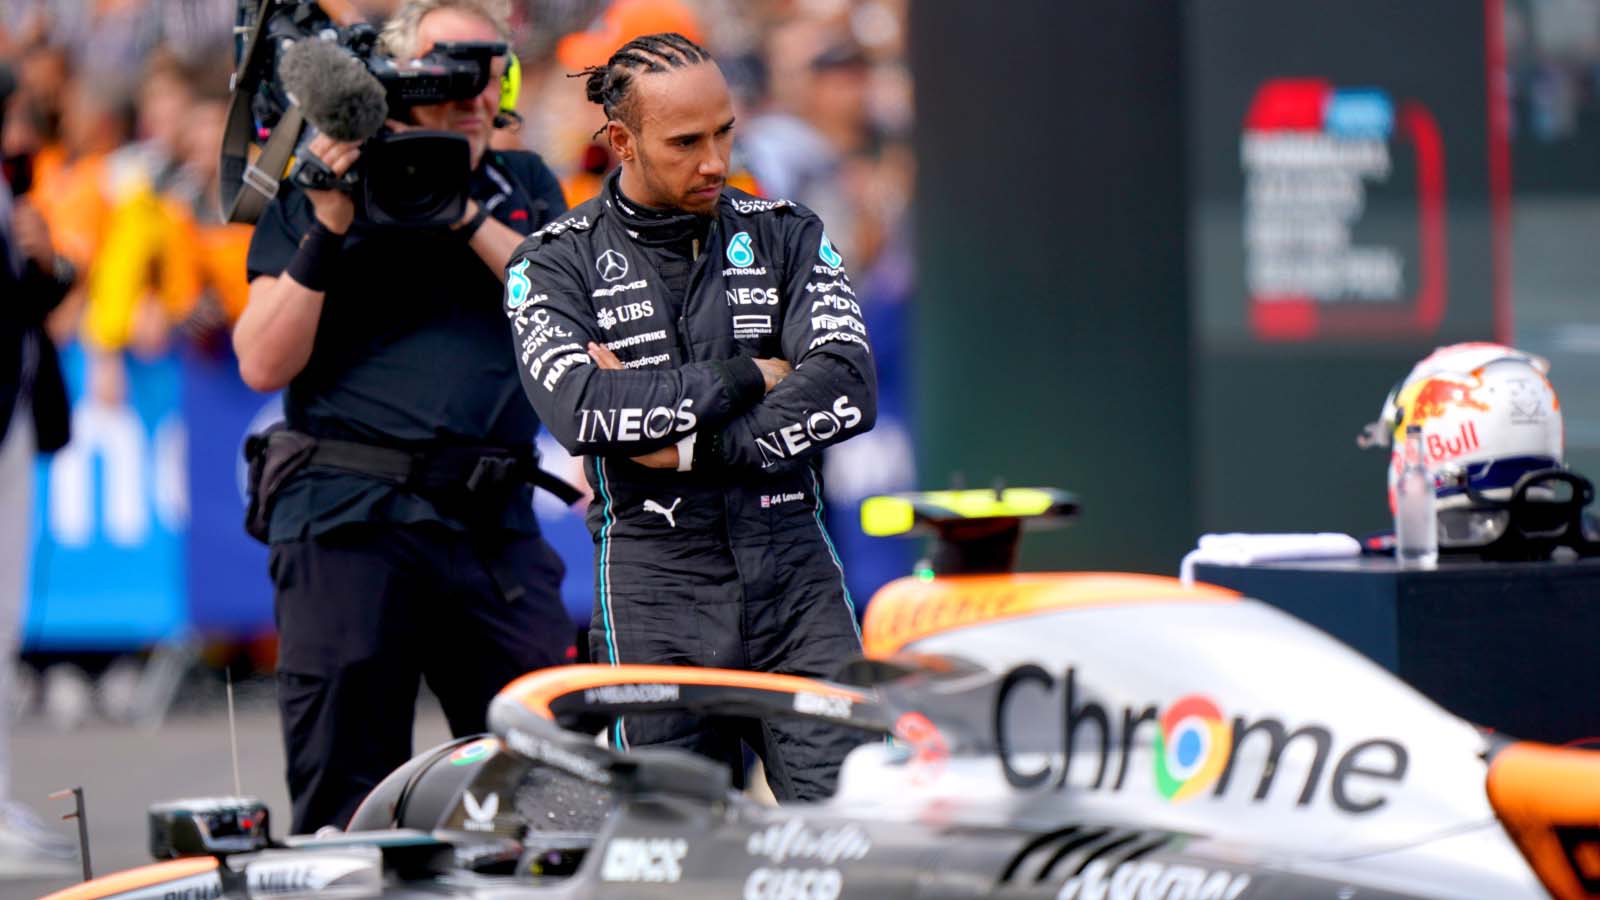 Lewis Hamilton inspects the McLaren after the race. Silverstone July 2023.